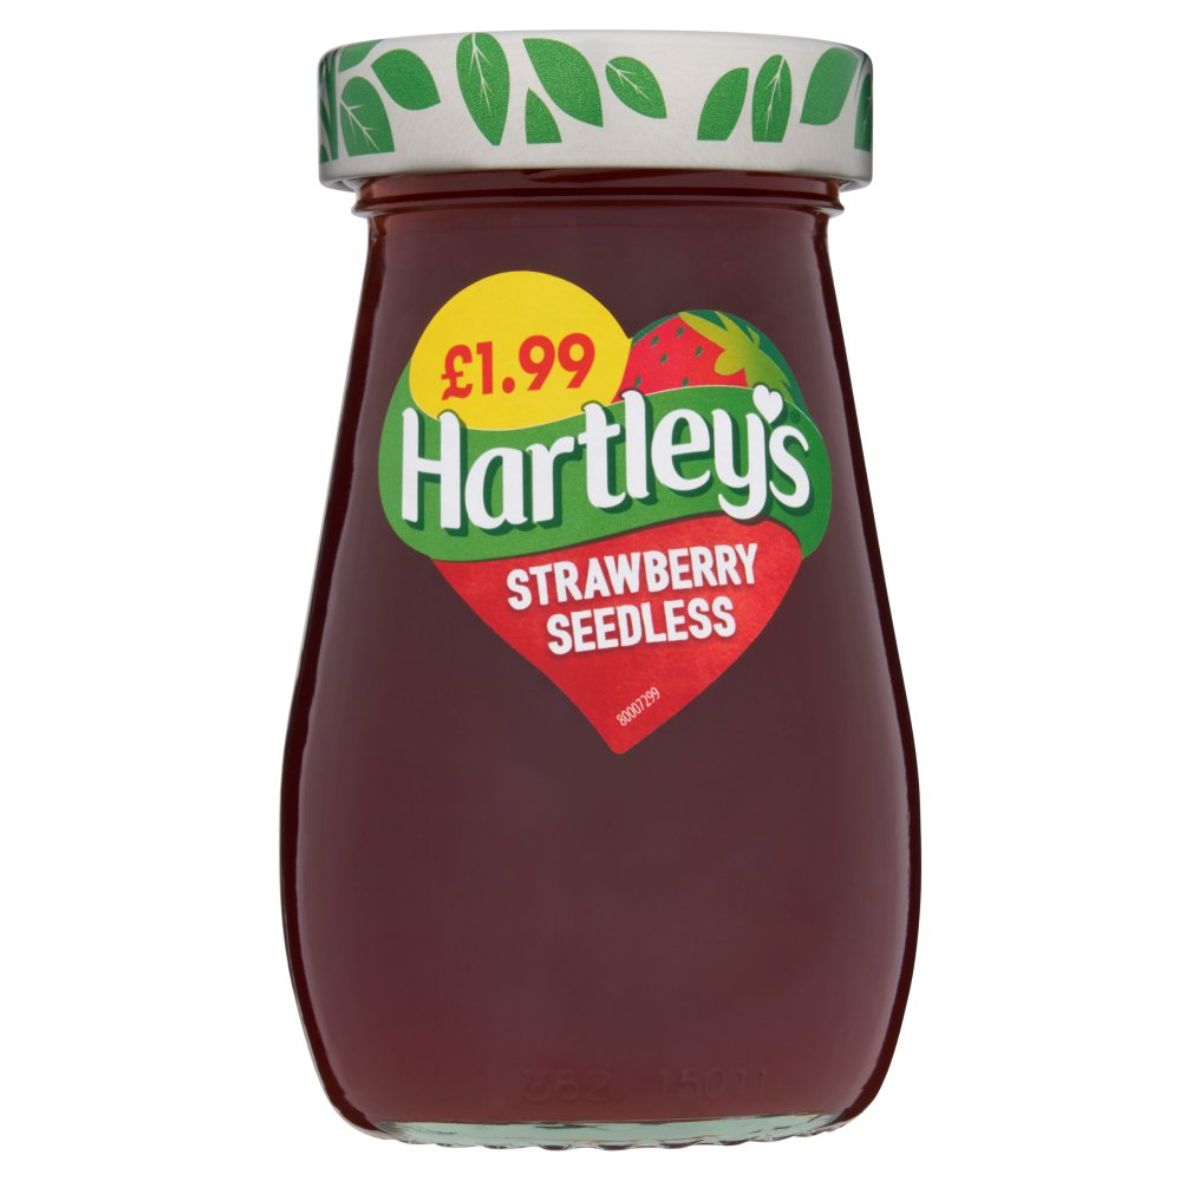 A jar of Hartleys - Strawberry Seedless - 300g jam on a white background.